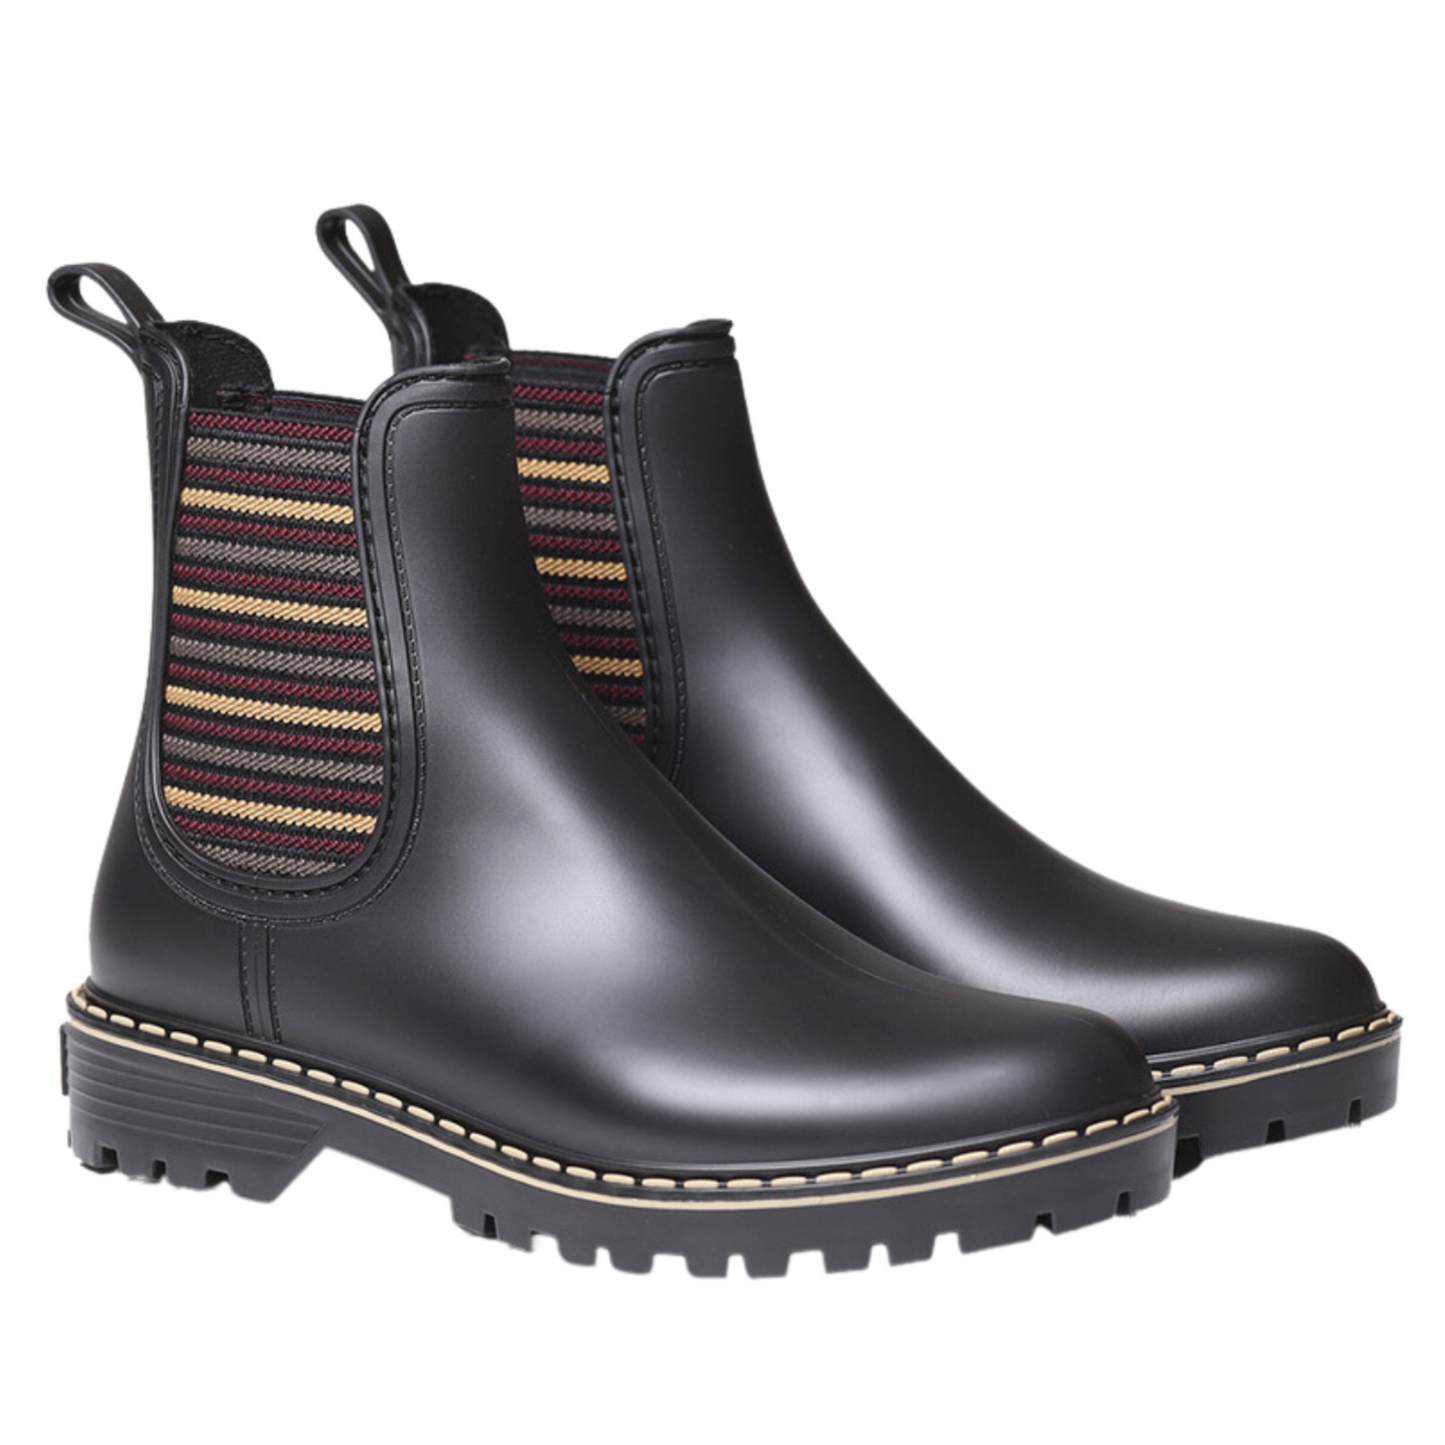 Right facing view of a pair of short black rain boots with red, beige and grey striped elastic side gores